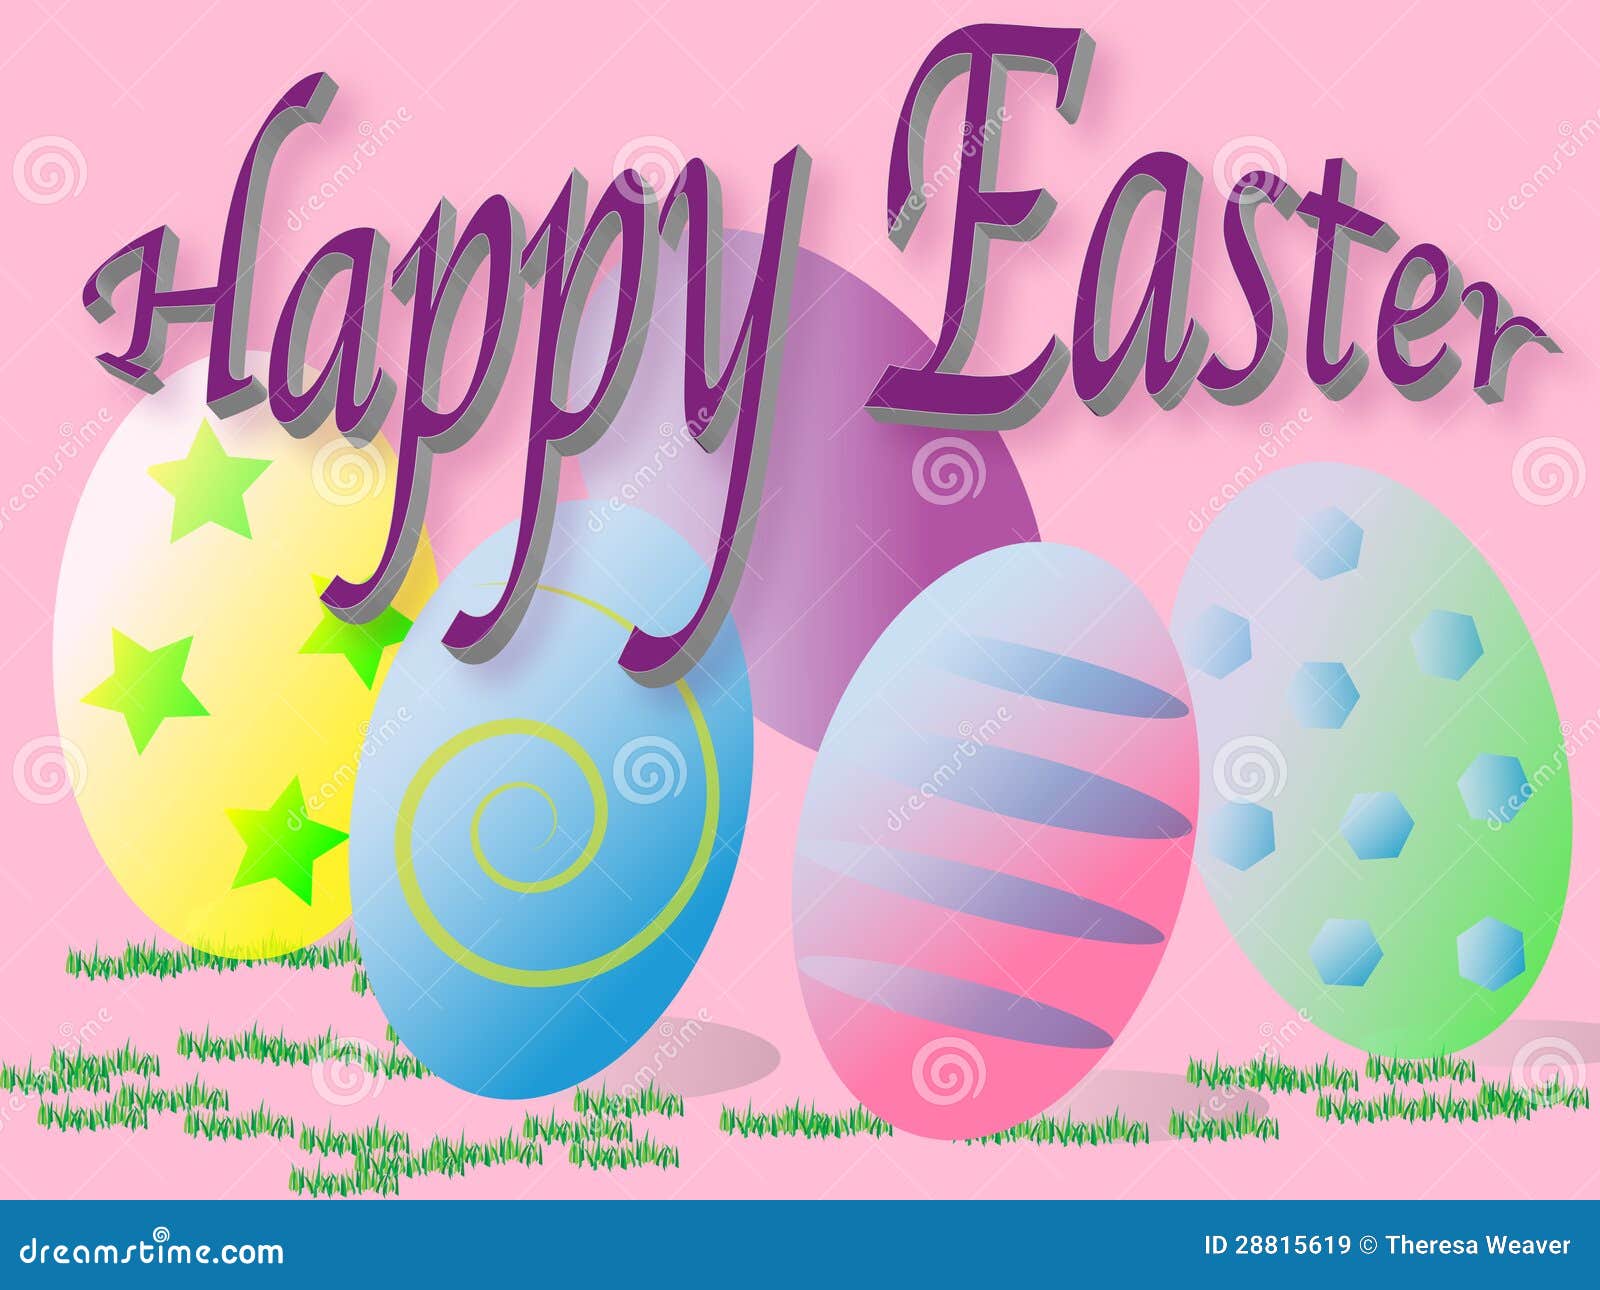  happy Easter 27 de Marzo 2016 Happy-easter-signage-large-letters-28815619